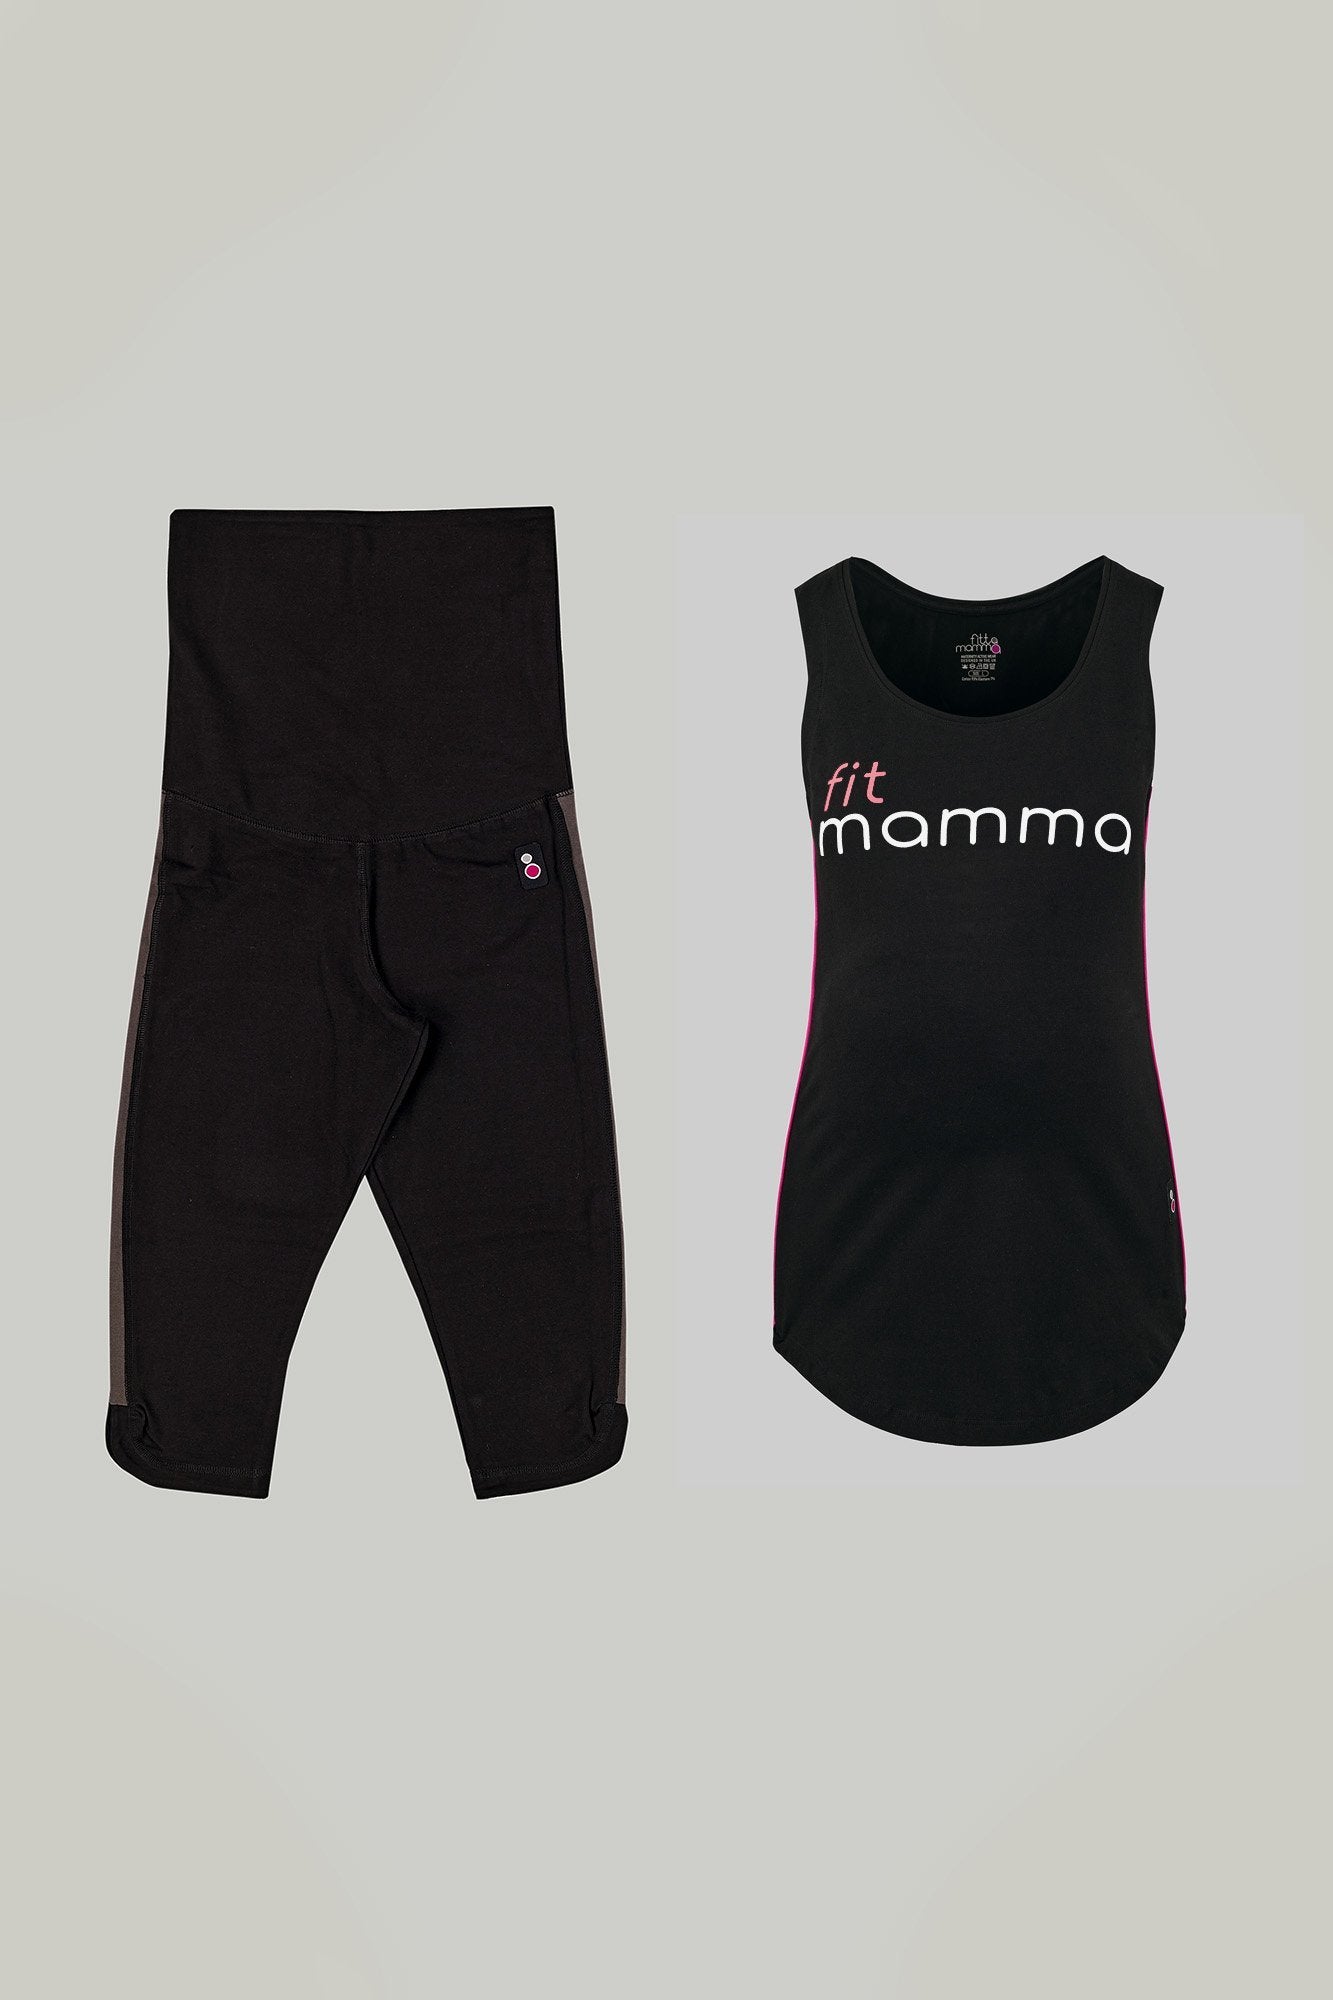 Fit Mamma Maternity Exercise Kit  Post Pregnancy Exercise clothes